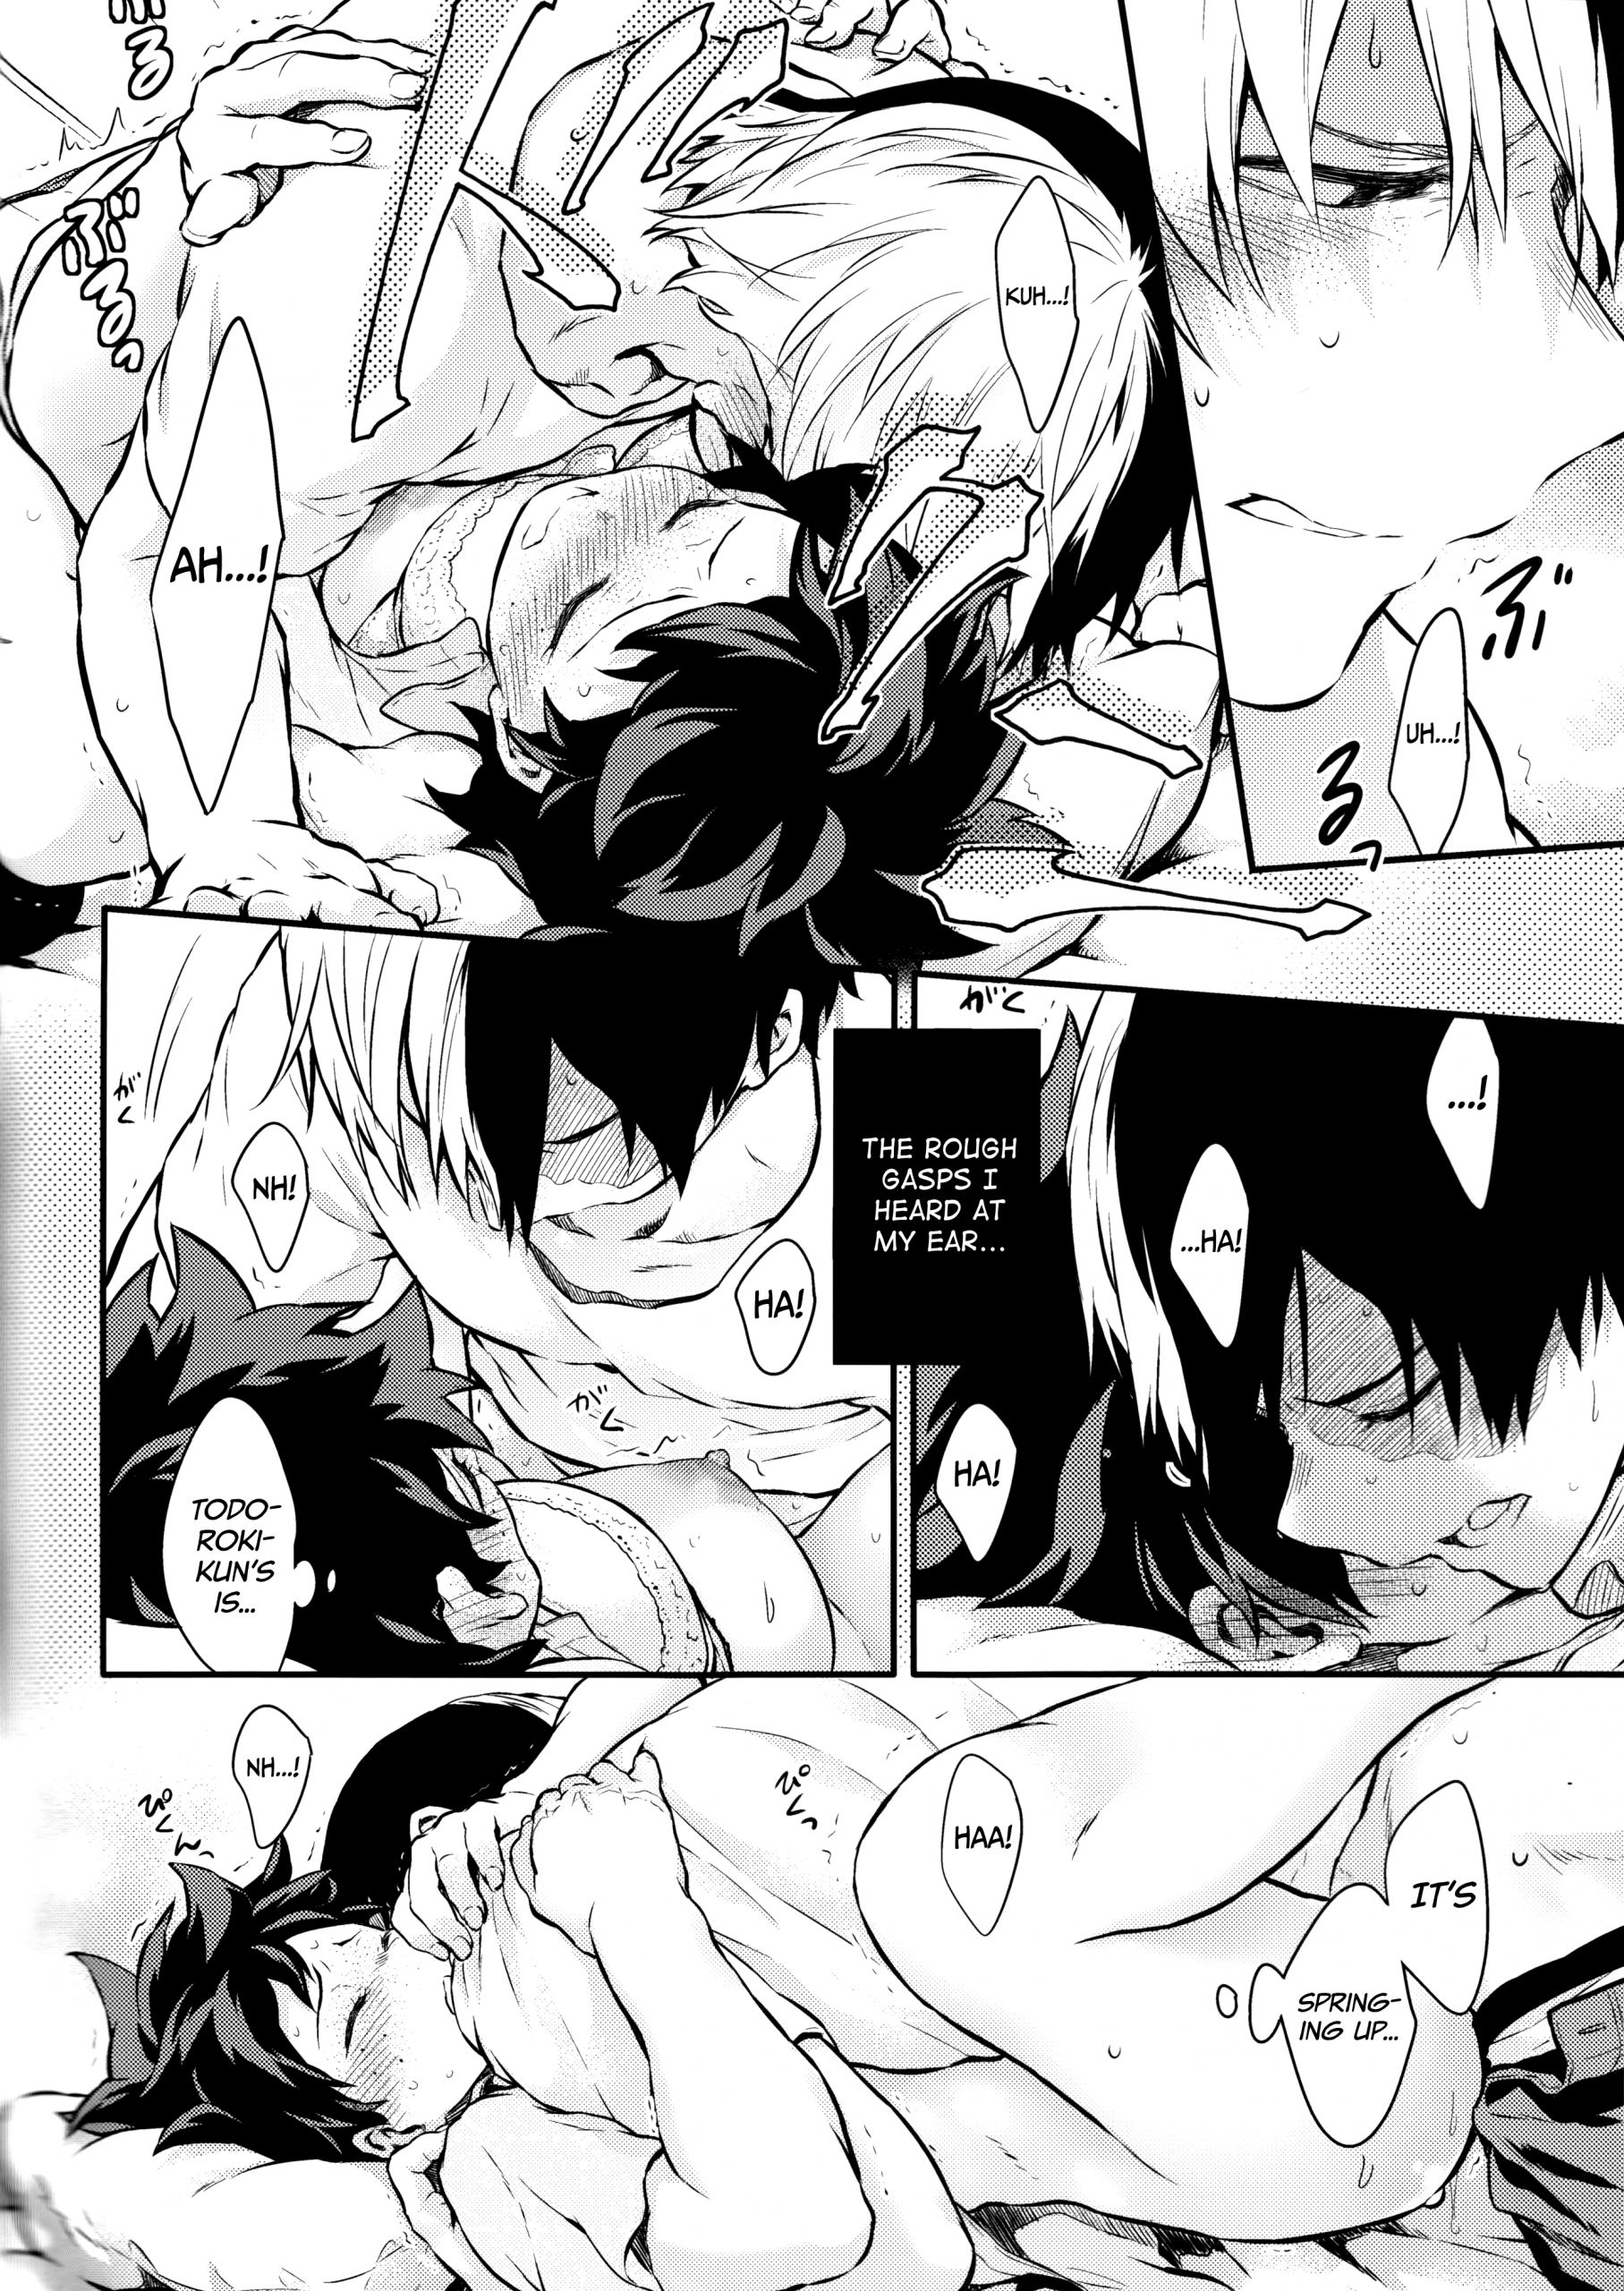 Love me tender another story hentai manga picture 36